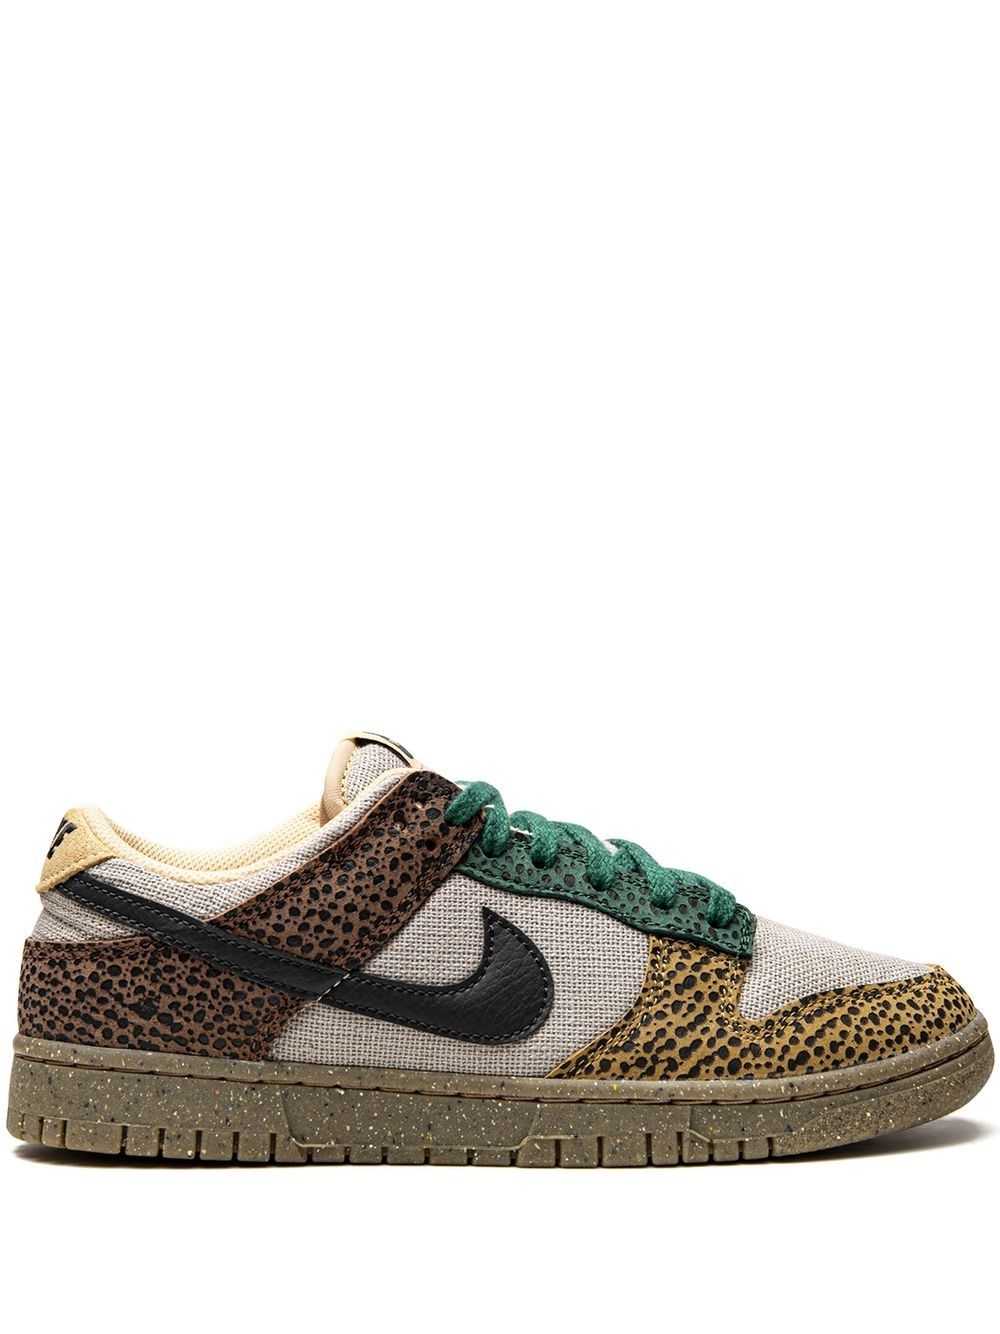 Nike Dunk Low Safari Trainer In Cacao  Wow/off Noir-gorge Green-golden Moss-gum Lt